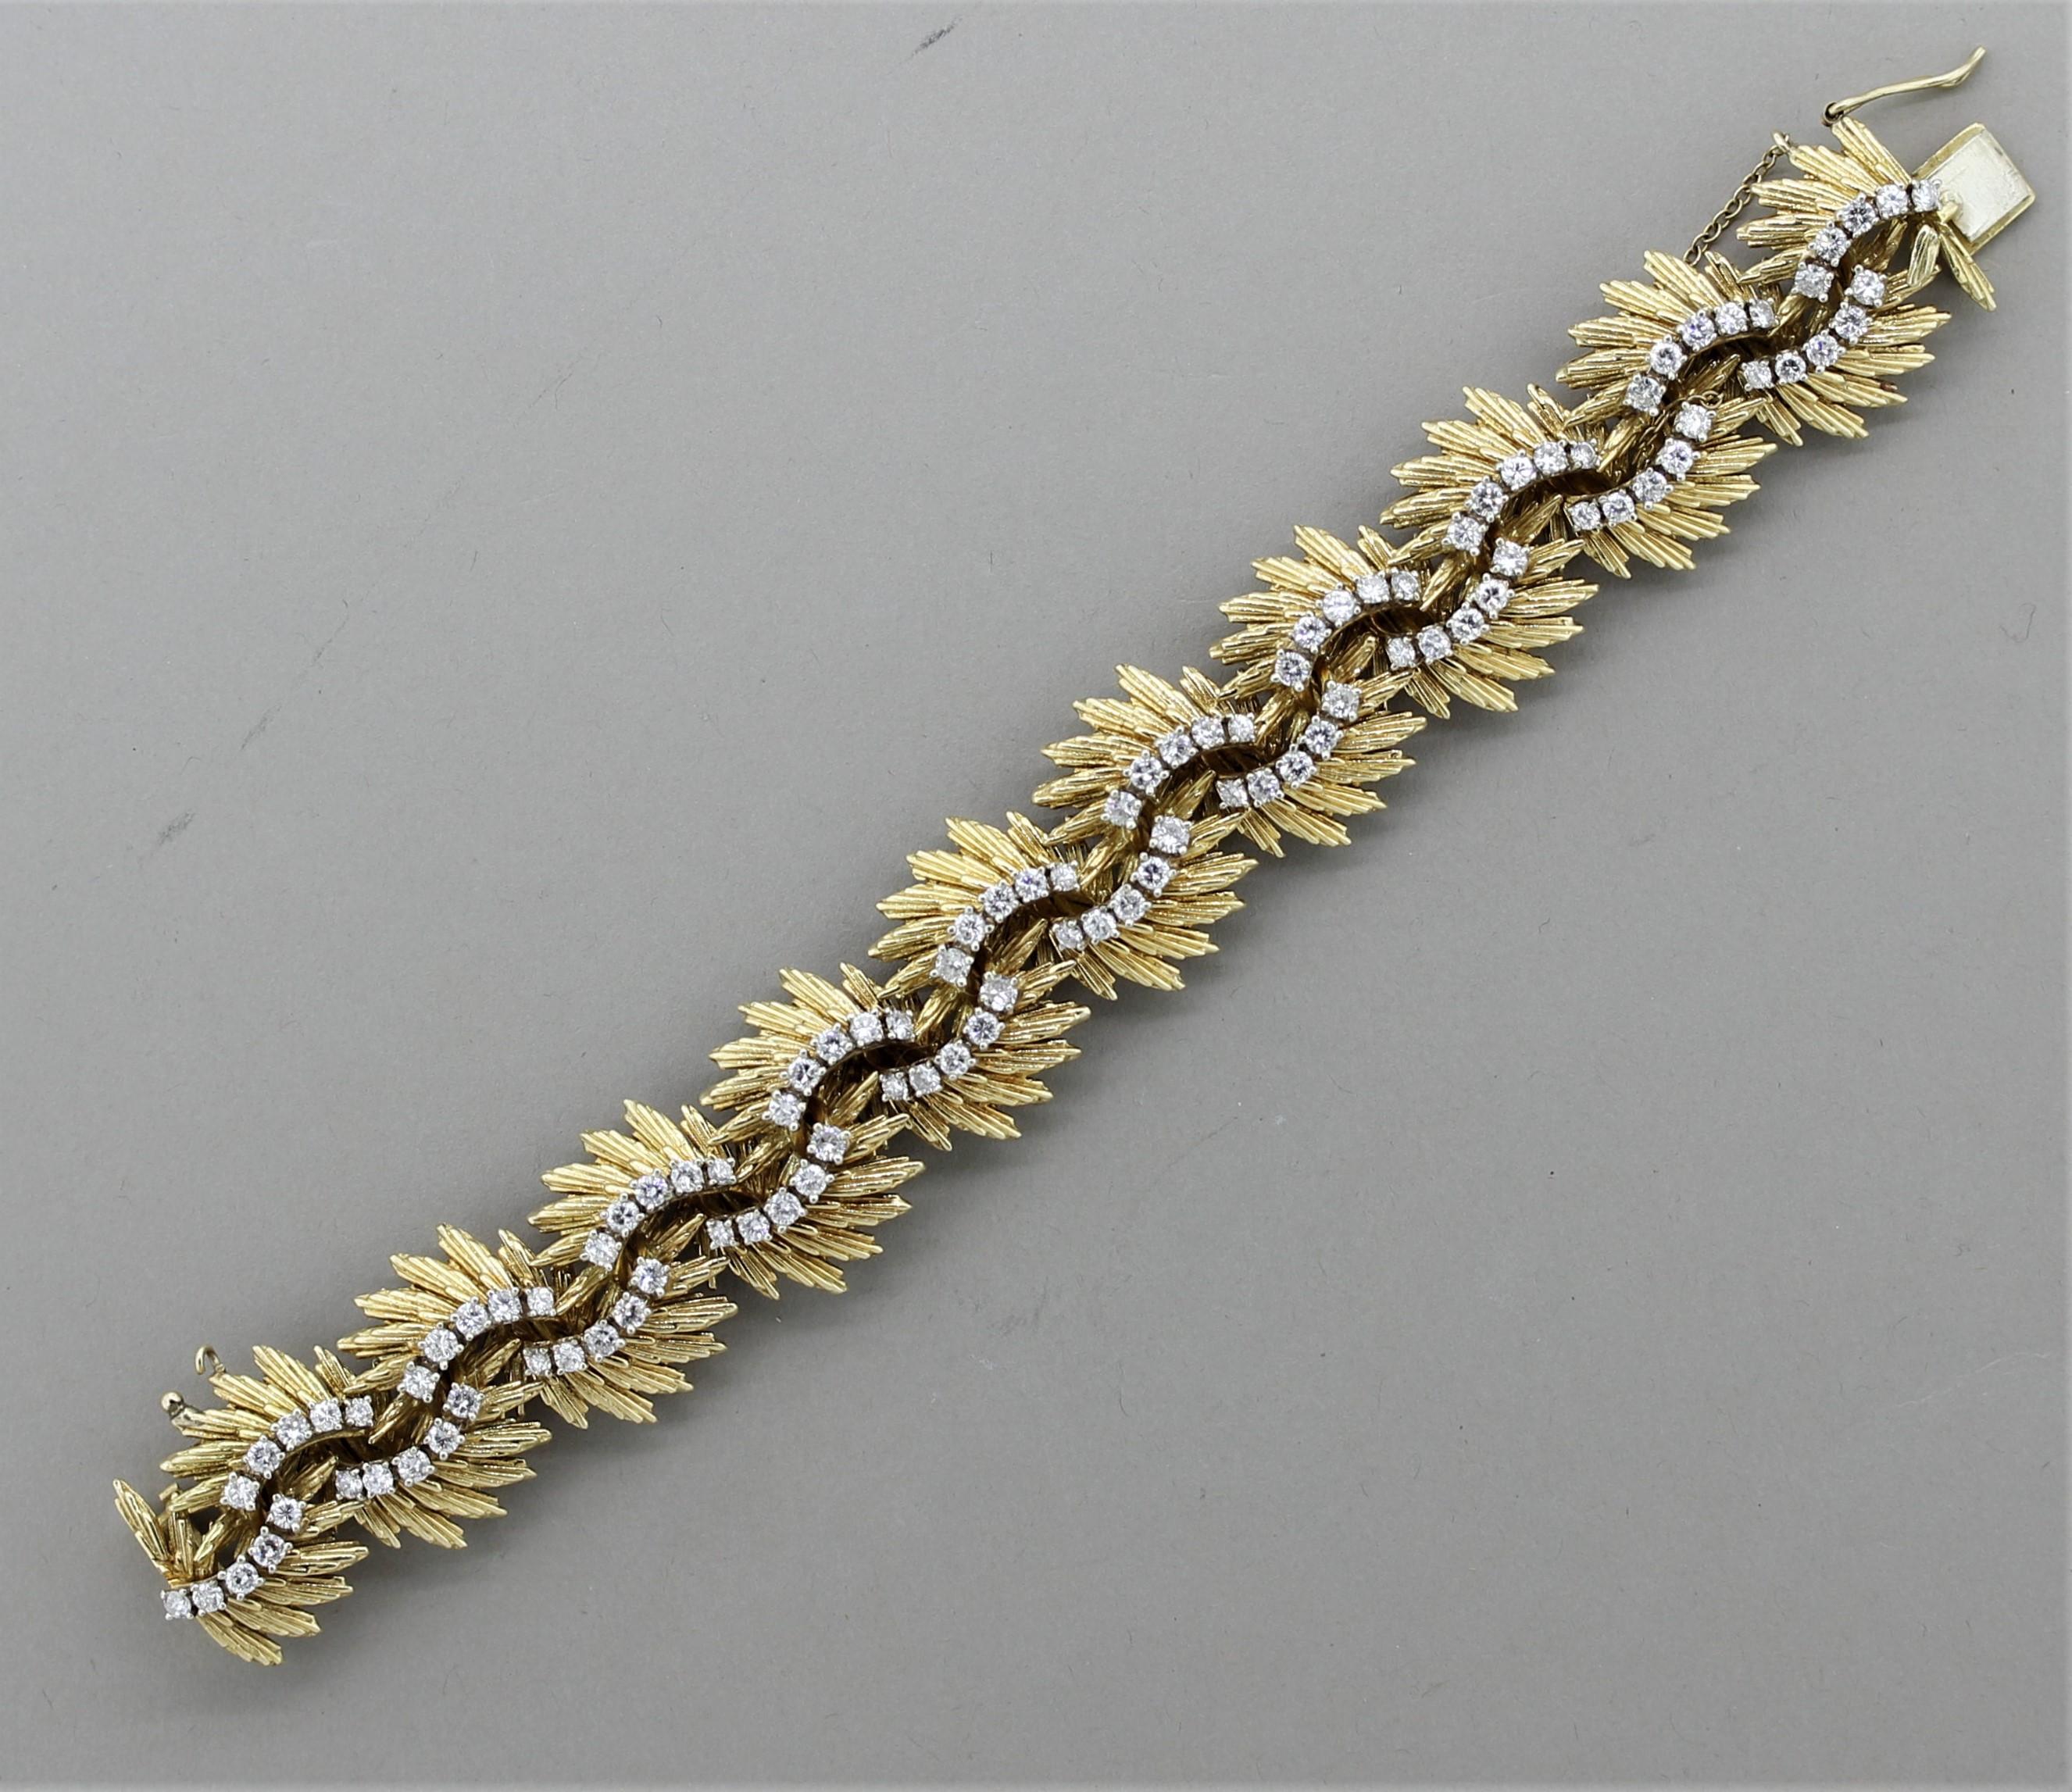 A bold and original piece from the retro period! Made in the 1940’s this stylish bracelet features approximately 6 carats of round brilliant-cut diamonds set across the piece. The gold accents have been hand-sculpted to radiate out from the bracelet